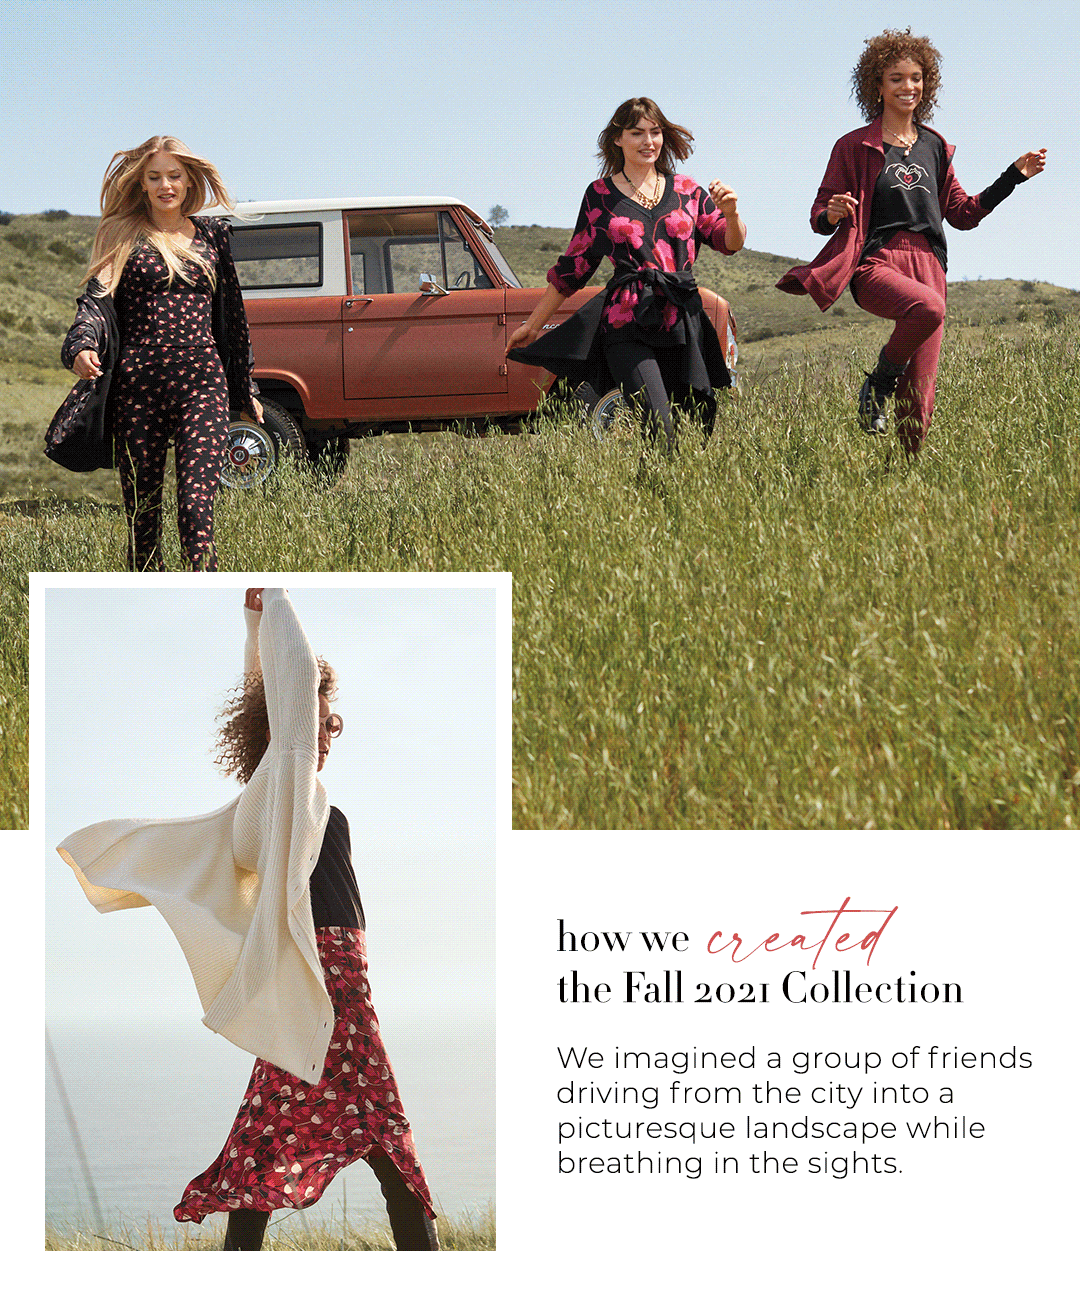 Look Book - cabi Fall 2021 Collection - Page 12-13